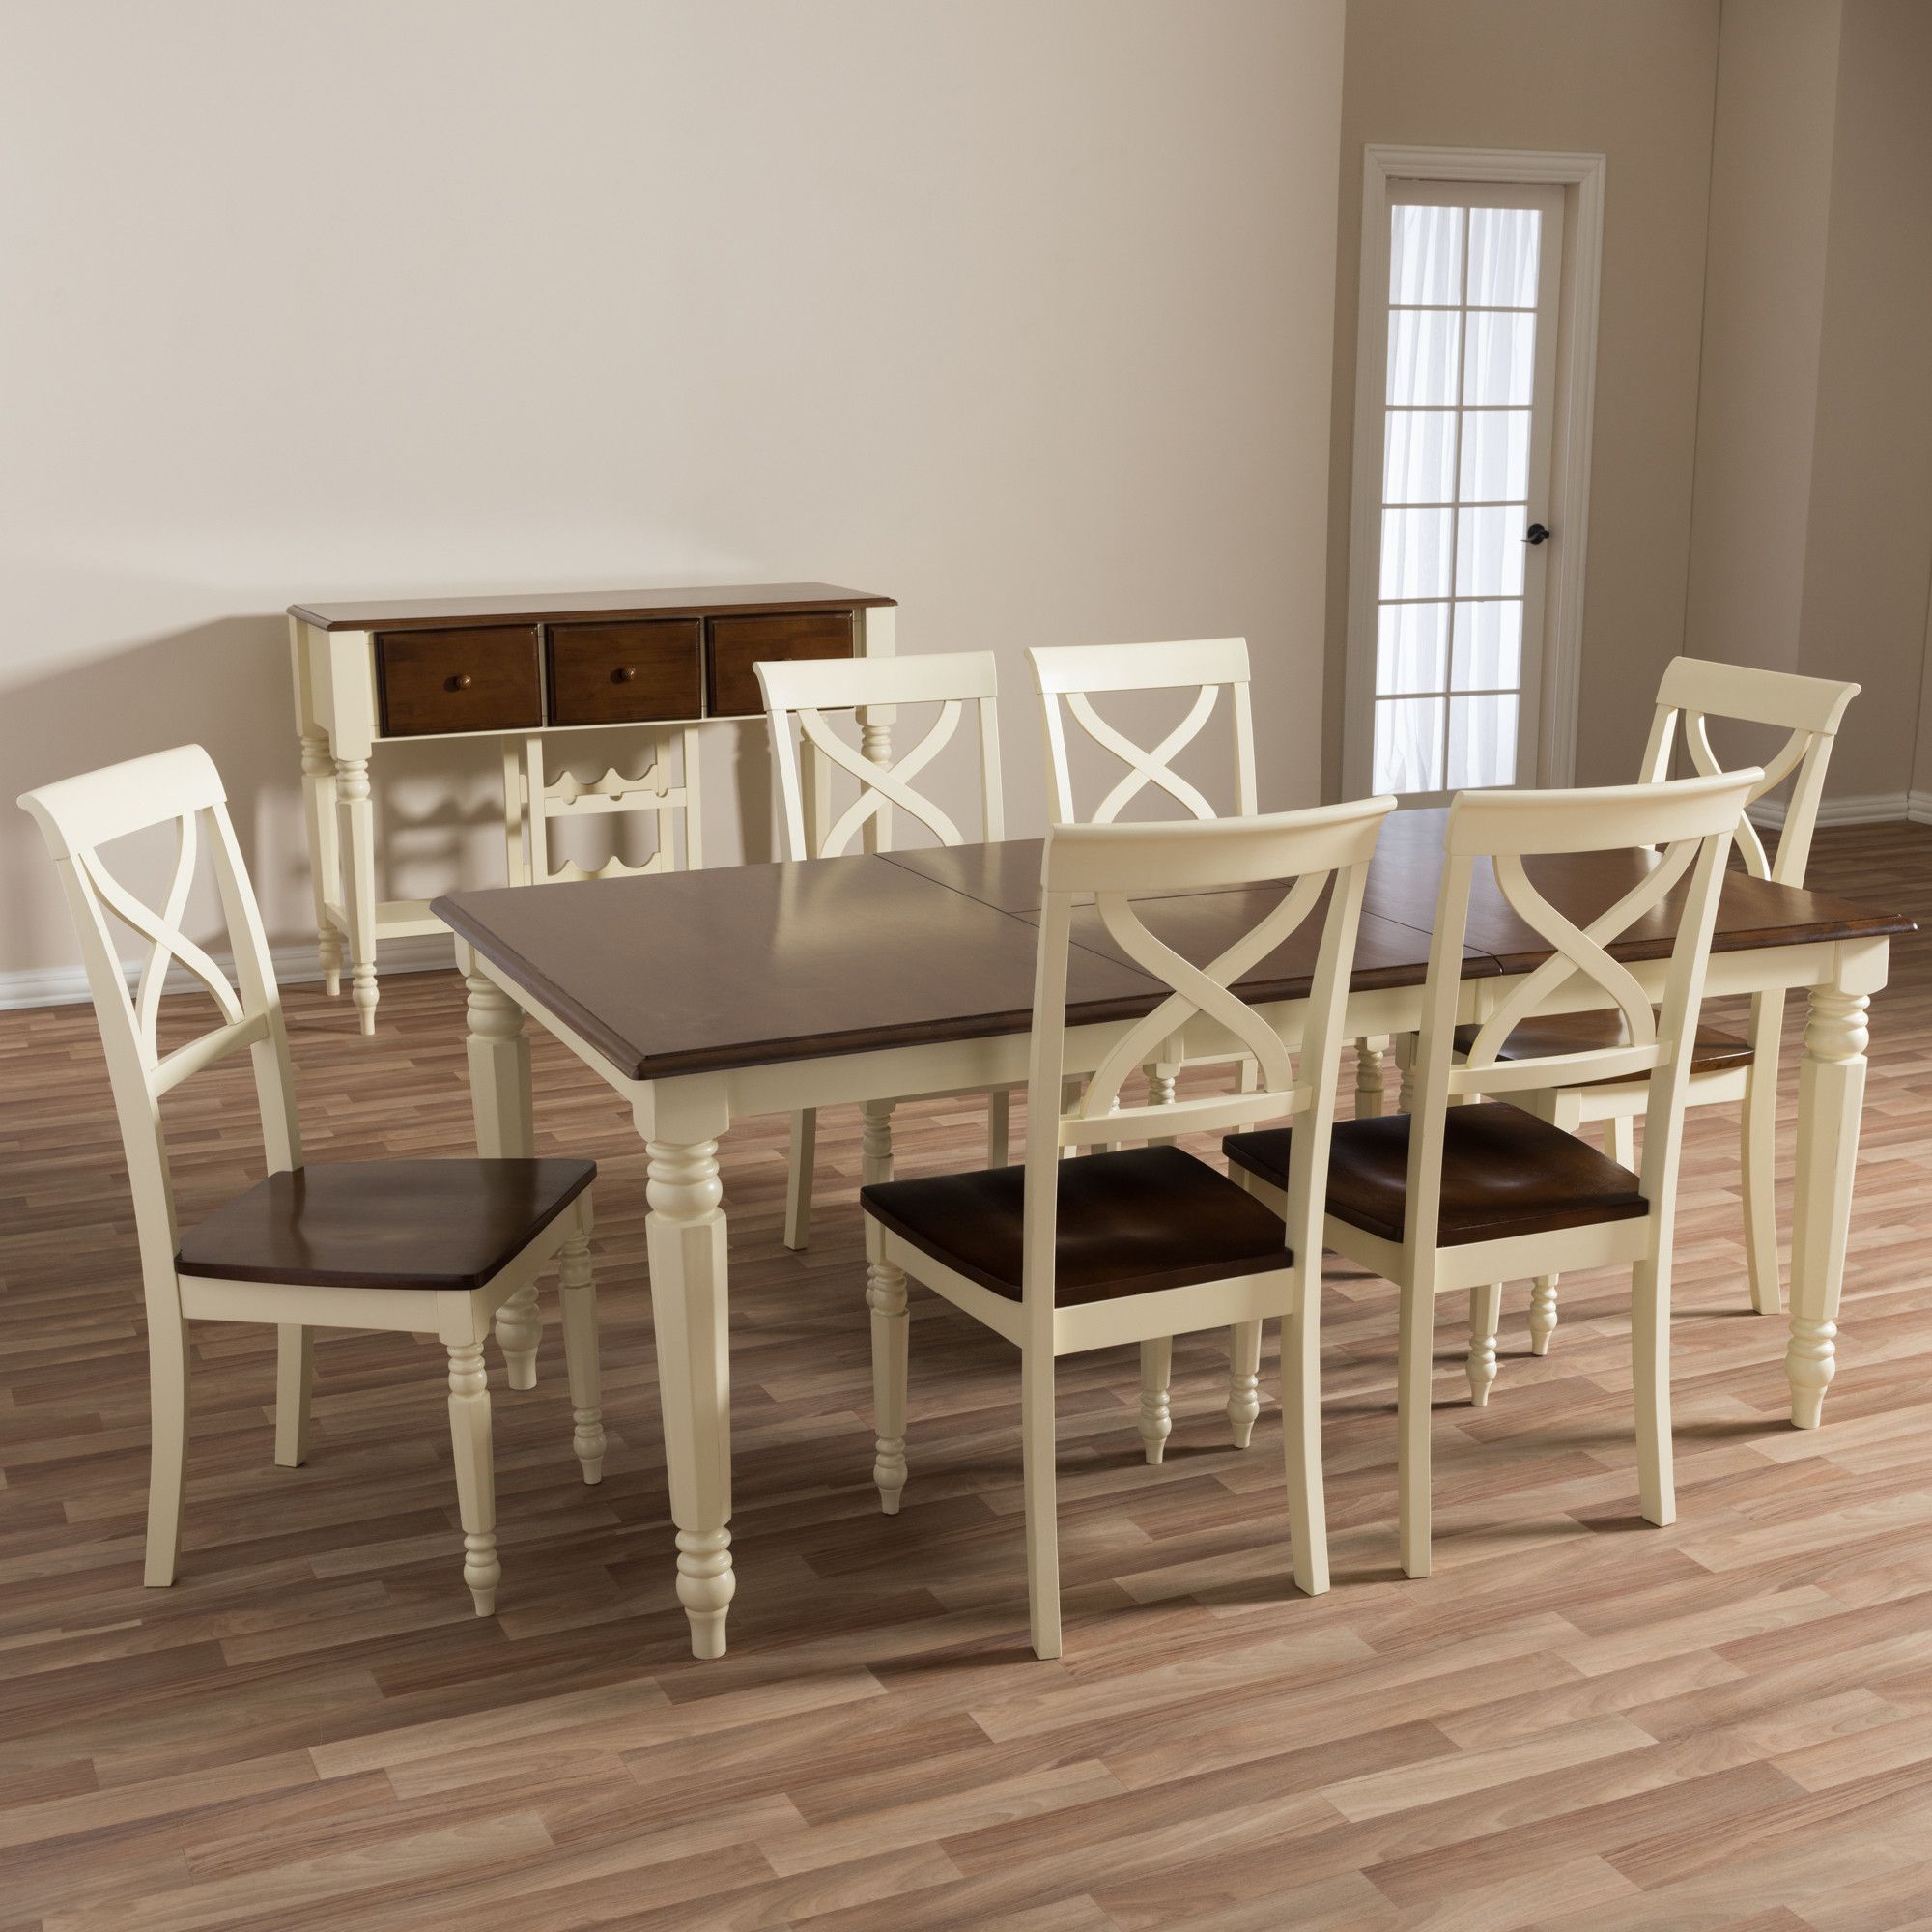 Wholesale Dining Sets. Room Pier One (View 18 of 20)